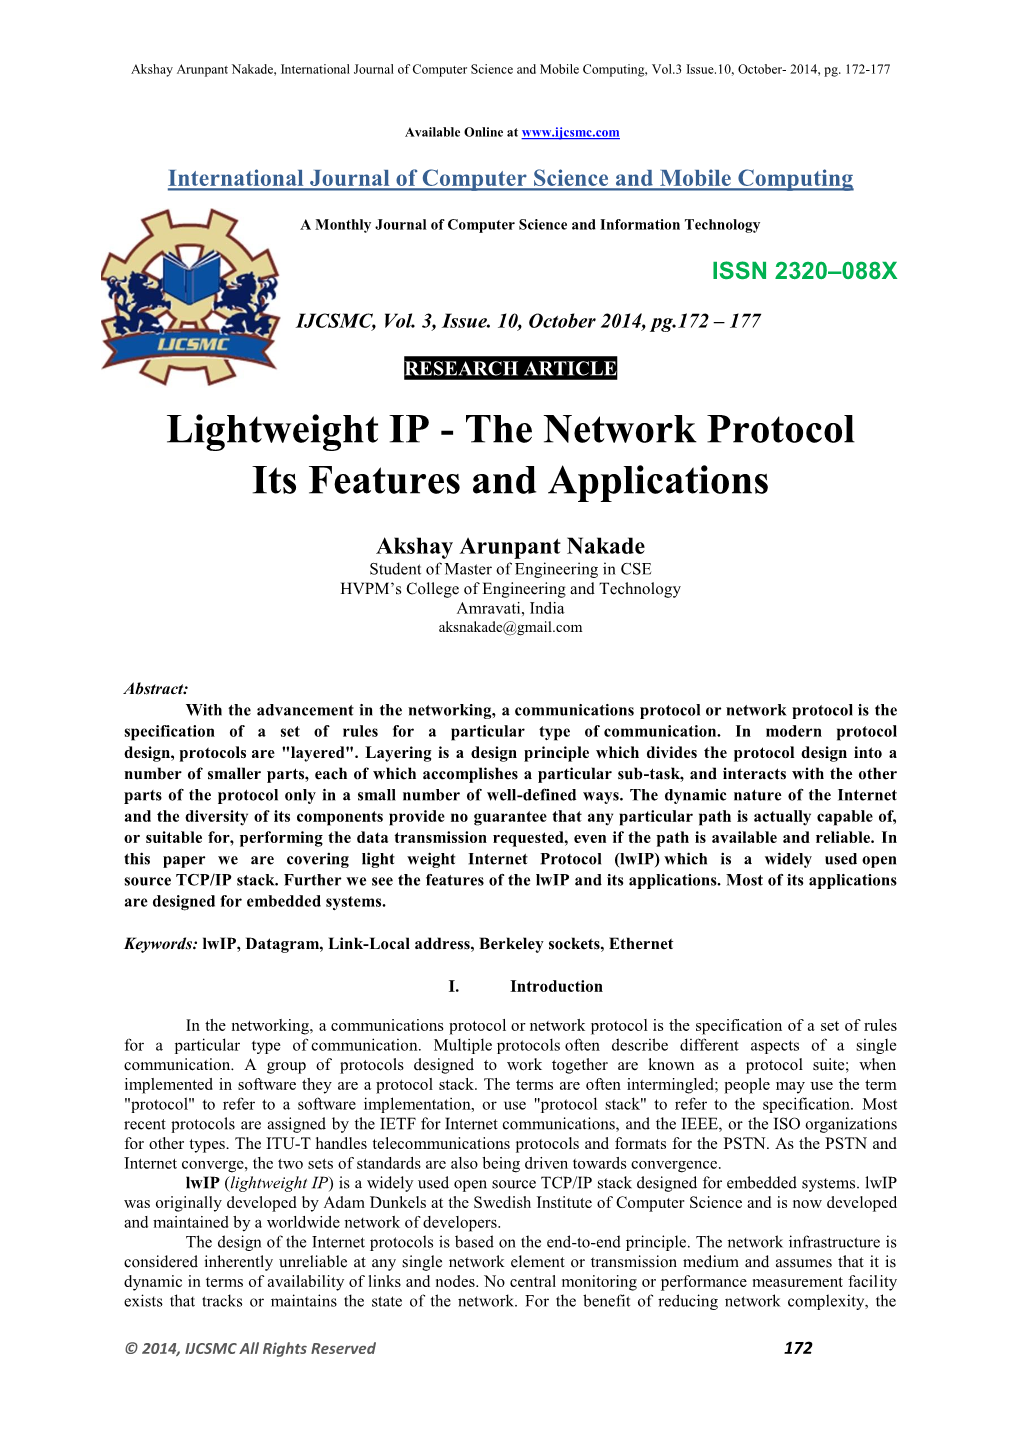 Lightweight IP - the Network Protocol Its Features and Applications